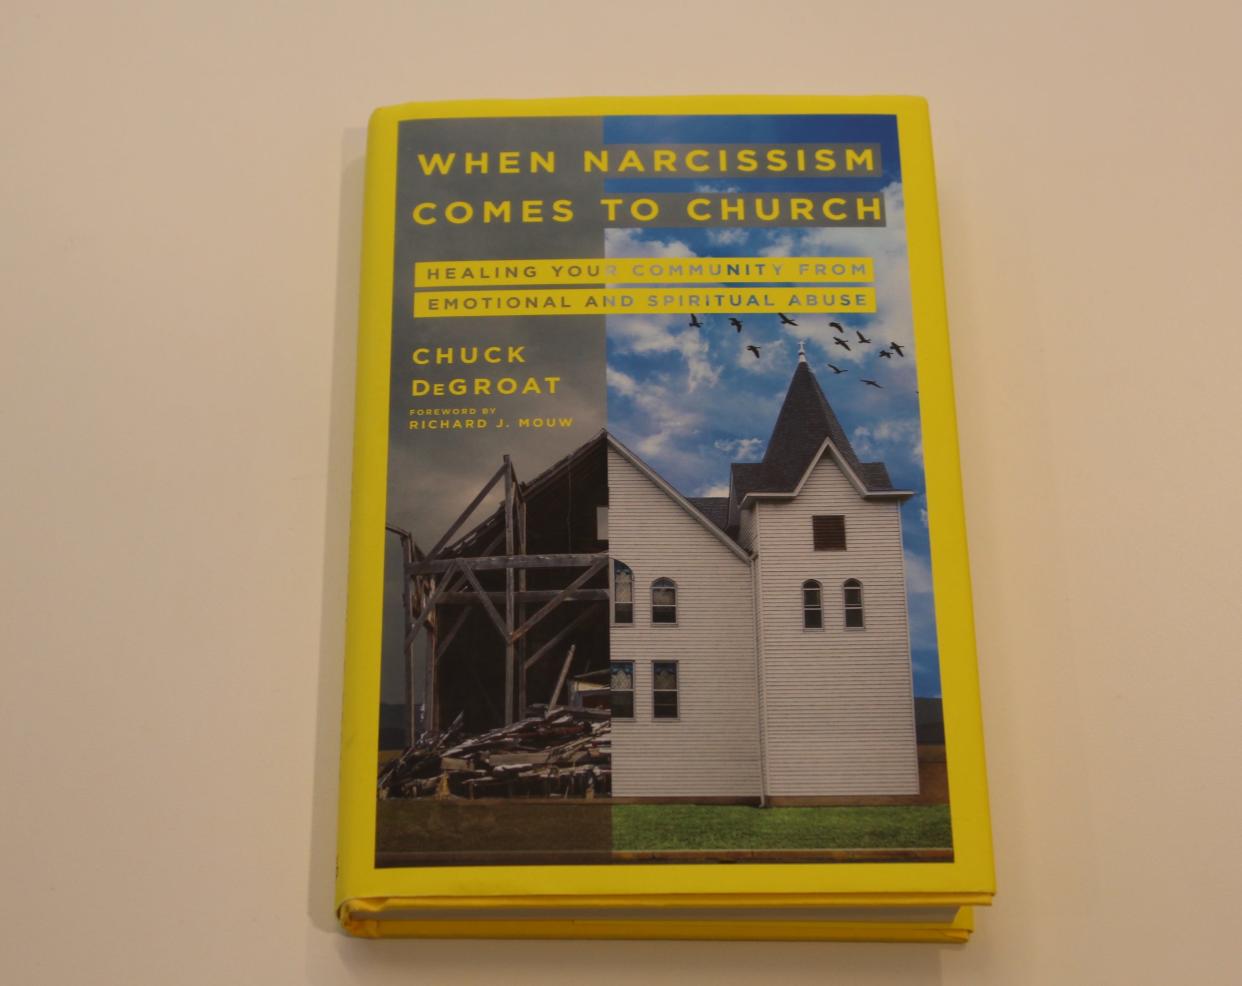 "When Narcissism Comes to Church" by Chuck DeGroat, a book that had a major influence on Christ Presbyterian Church employees amid conflict at the church under the leadership of Rev. Scott Sauls.